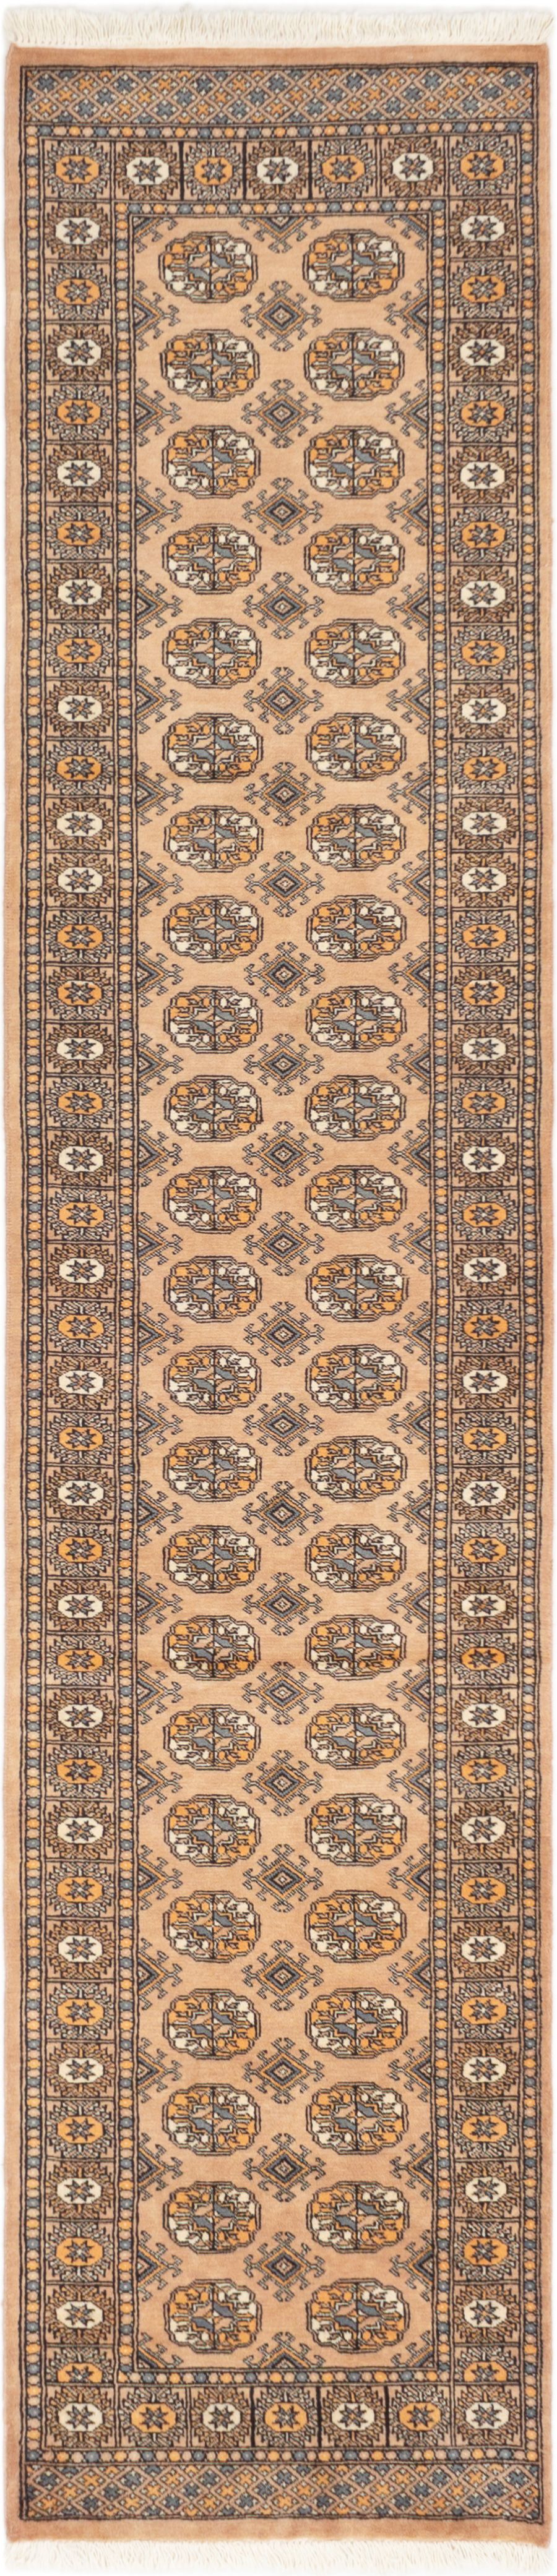 Hand-knotted Finest Peshawar Bokhara Tan Wool Rug 2'8" x 12'1" Size: 2'8" x 12'1"  